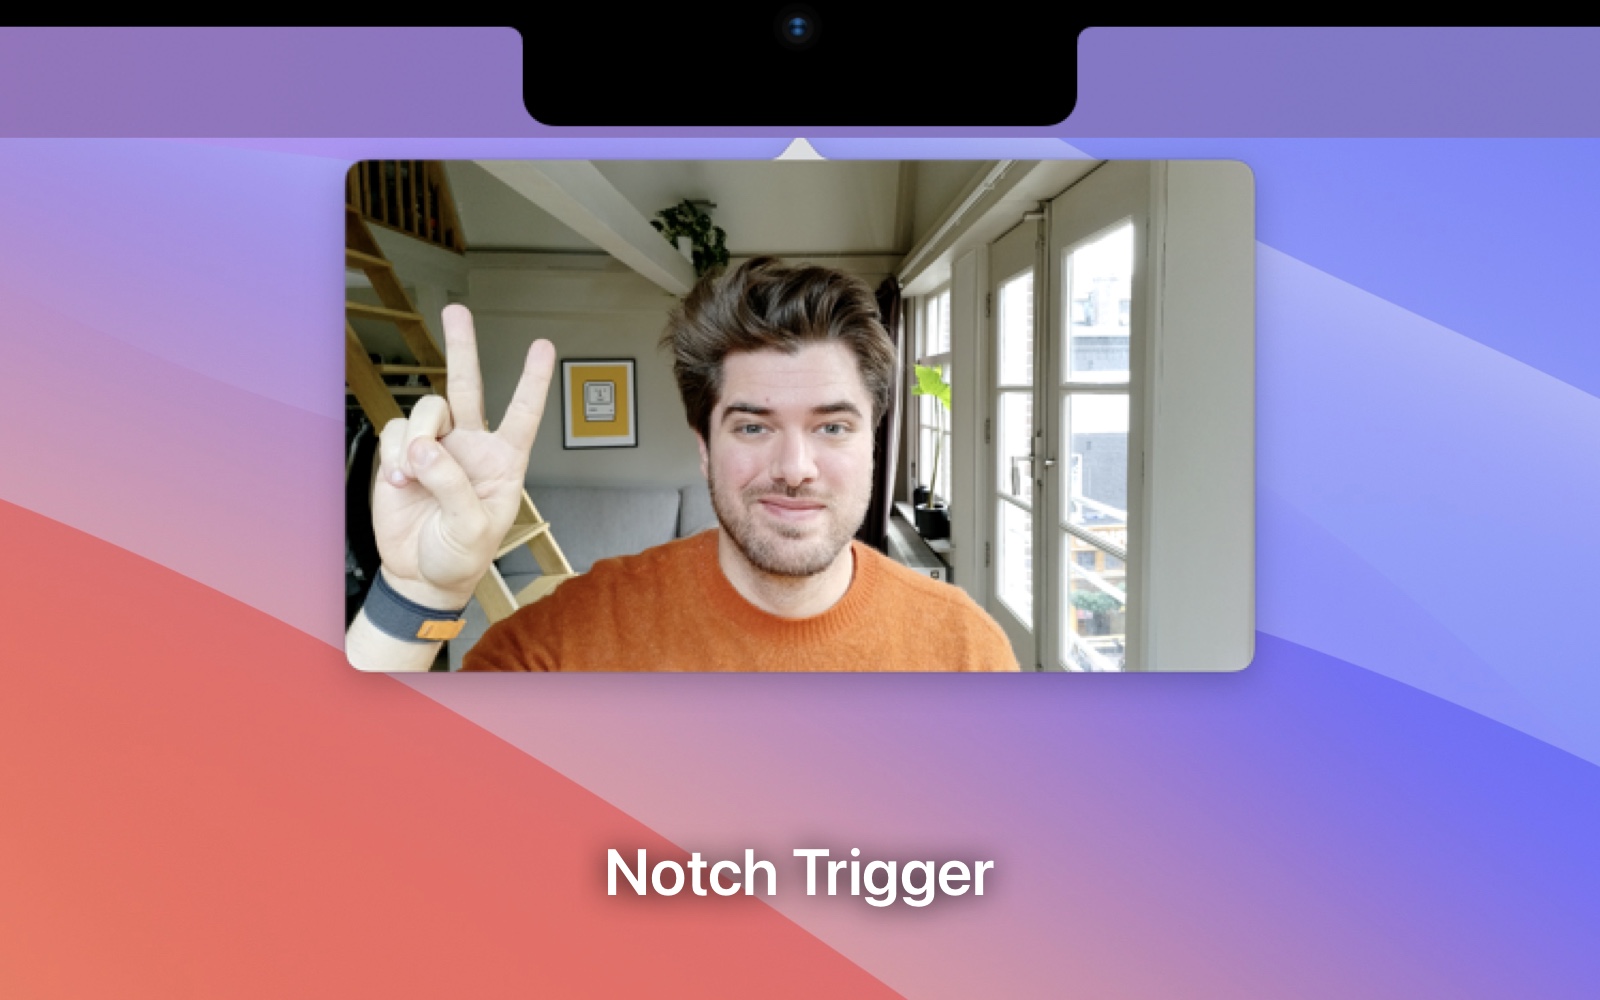 Screenshot of the camera being trigger from under a Mac notch.